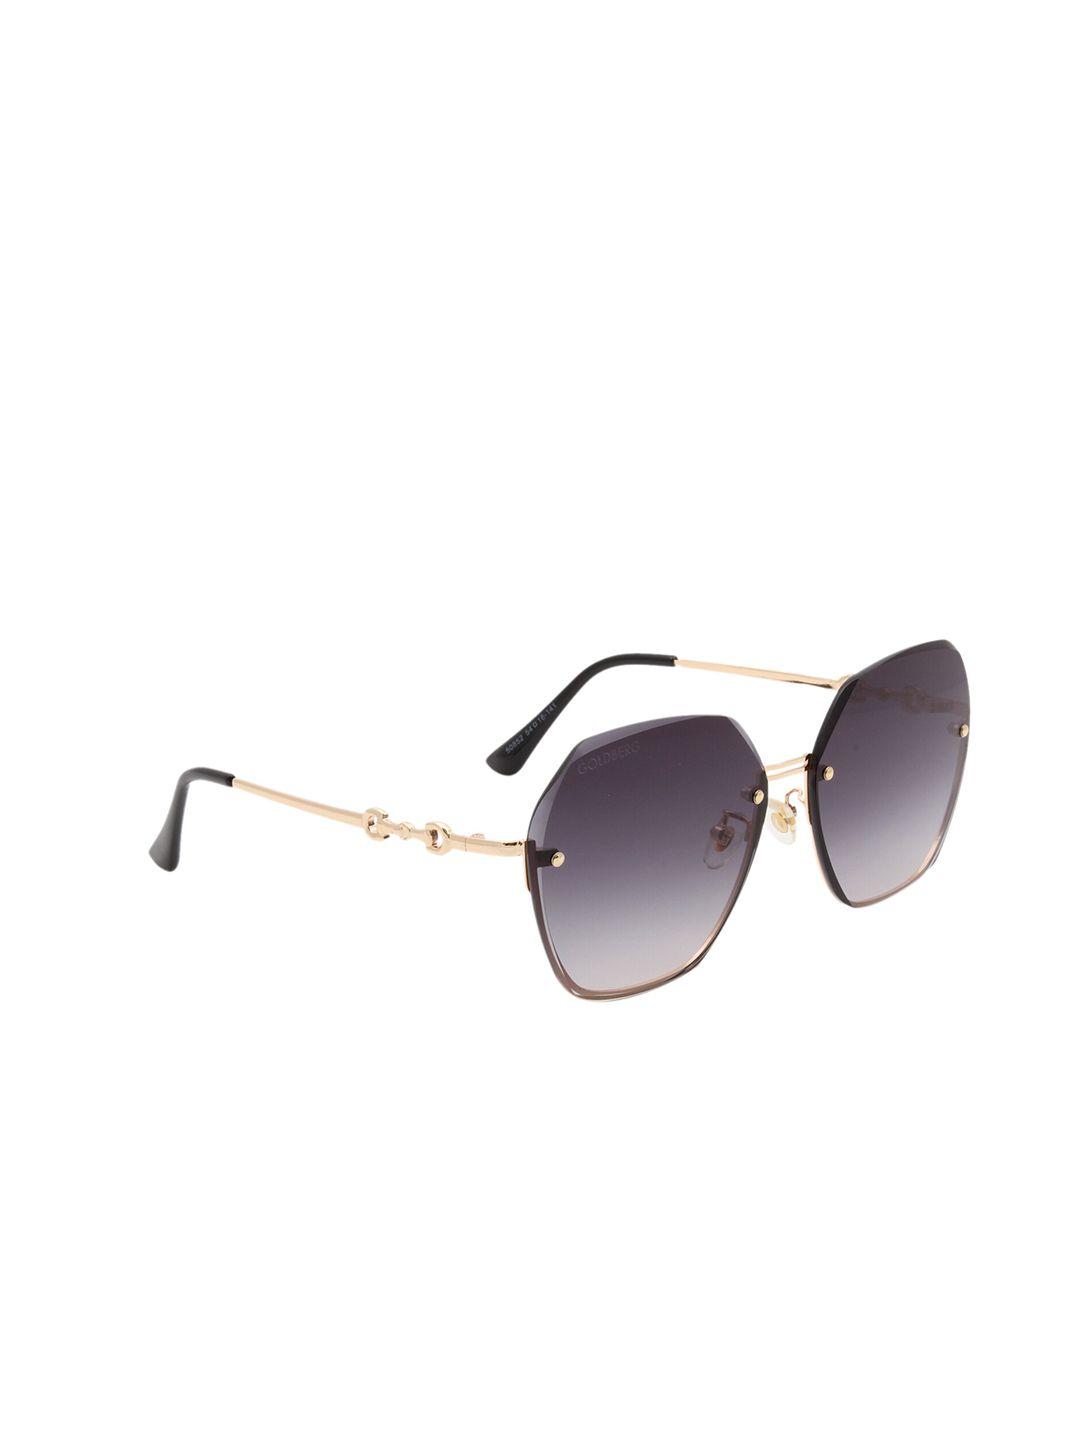 gold berg women grey lens & gold-toned sunglasses with uv protected lens gb-50852_gld-gry